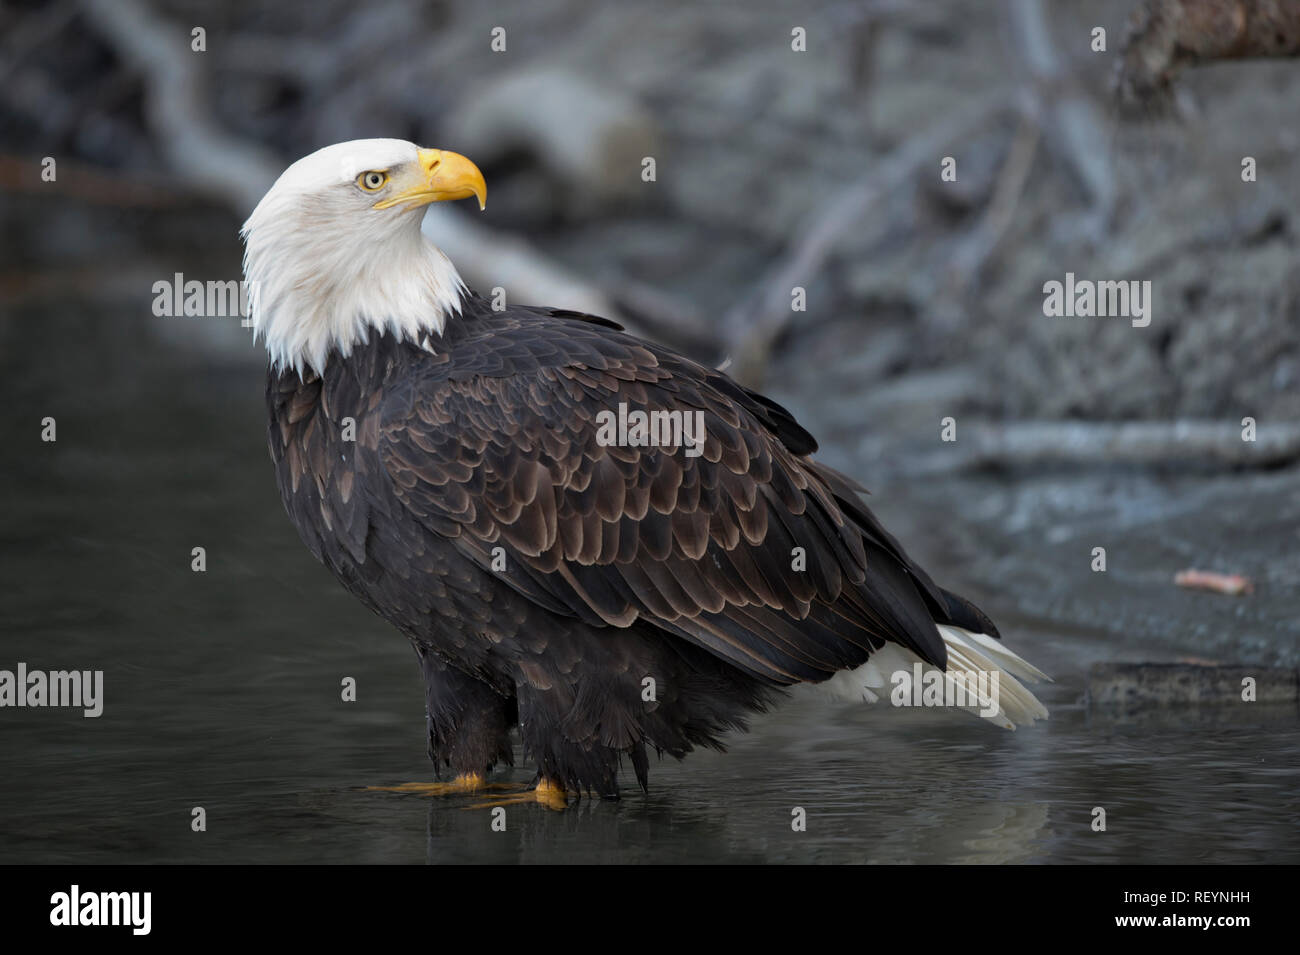 Adult bald eagle standing in shallow water at the Alaska Chilkat Bald Eagle Preserve near Haines, Alaska Stock Photo